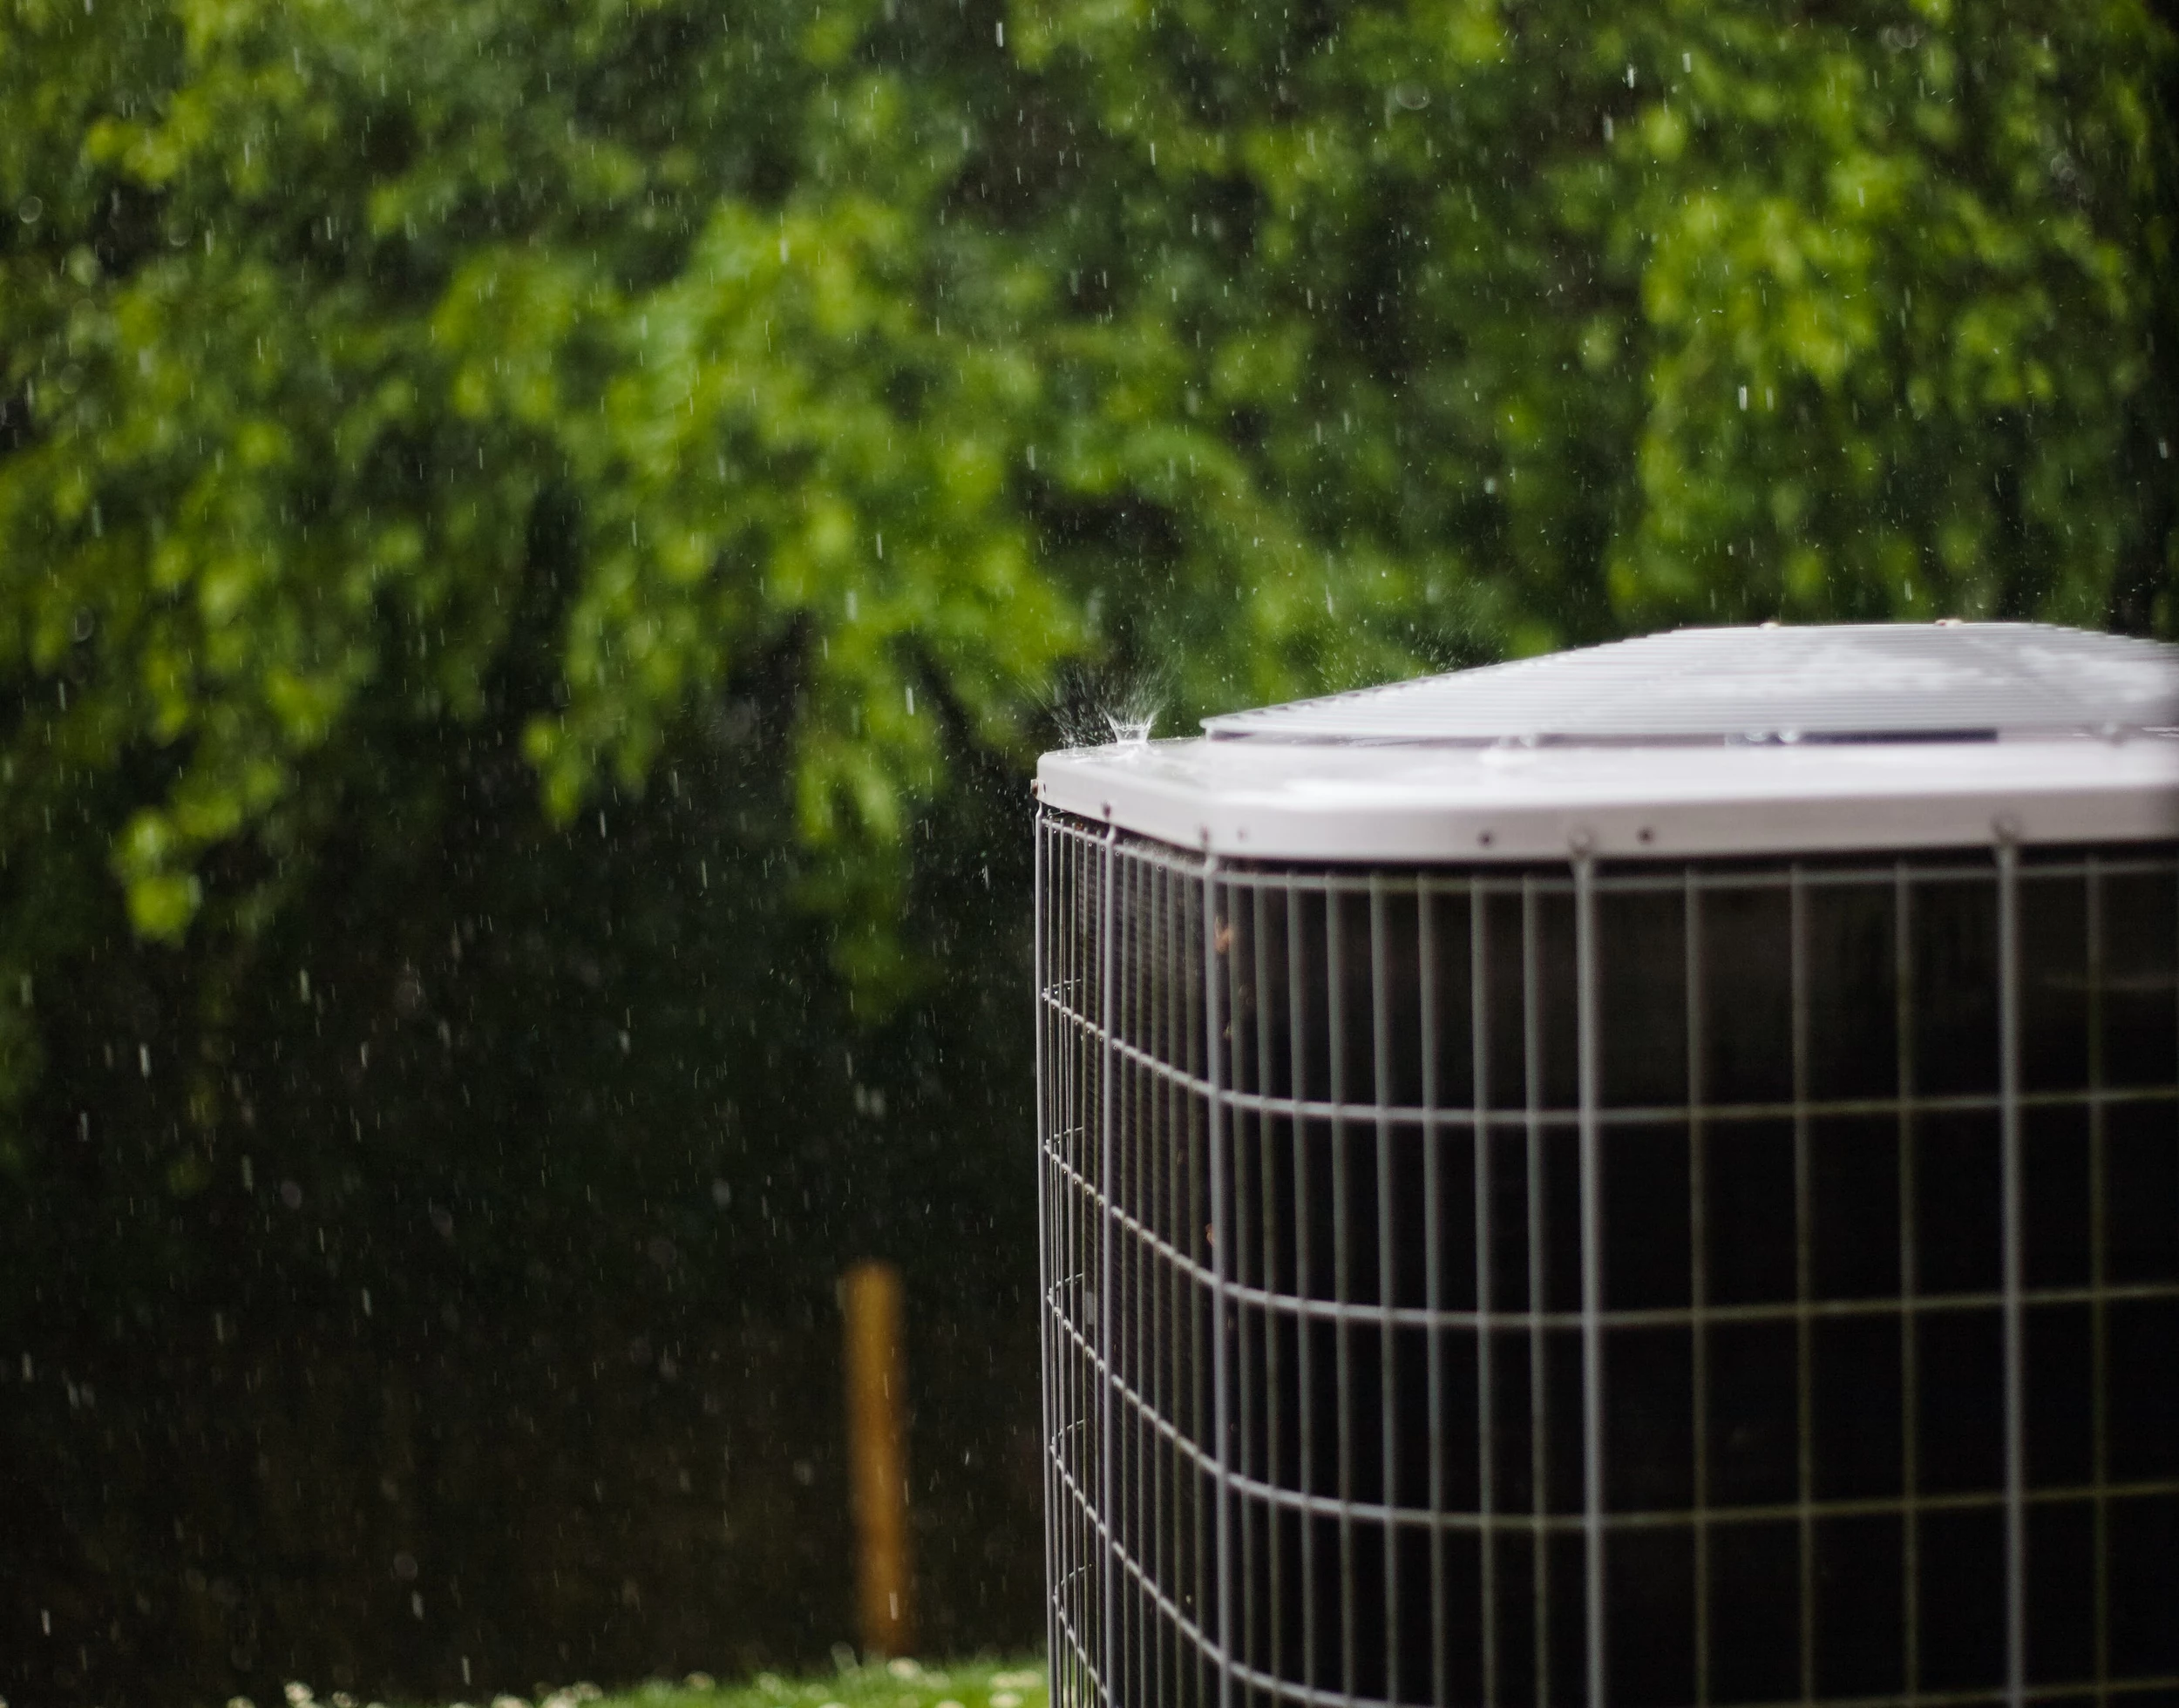 Is Putting an Umbrella Over Your A/C a Good Idea?